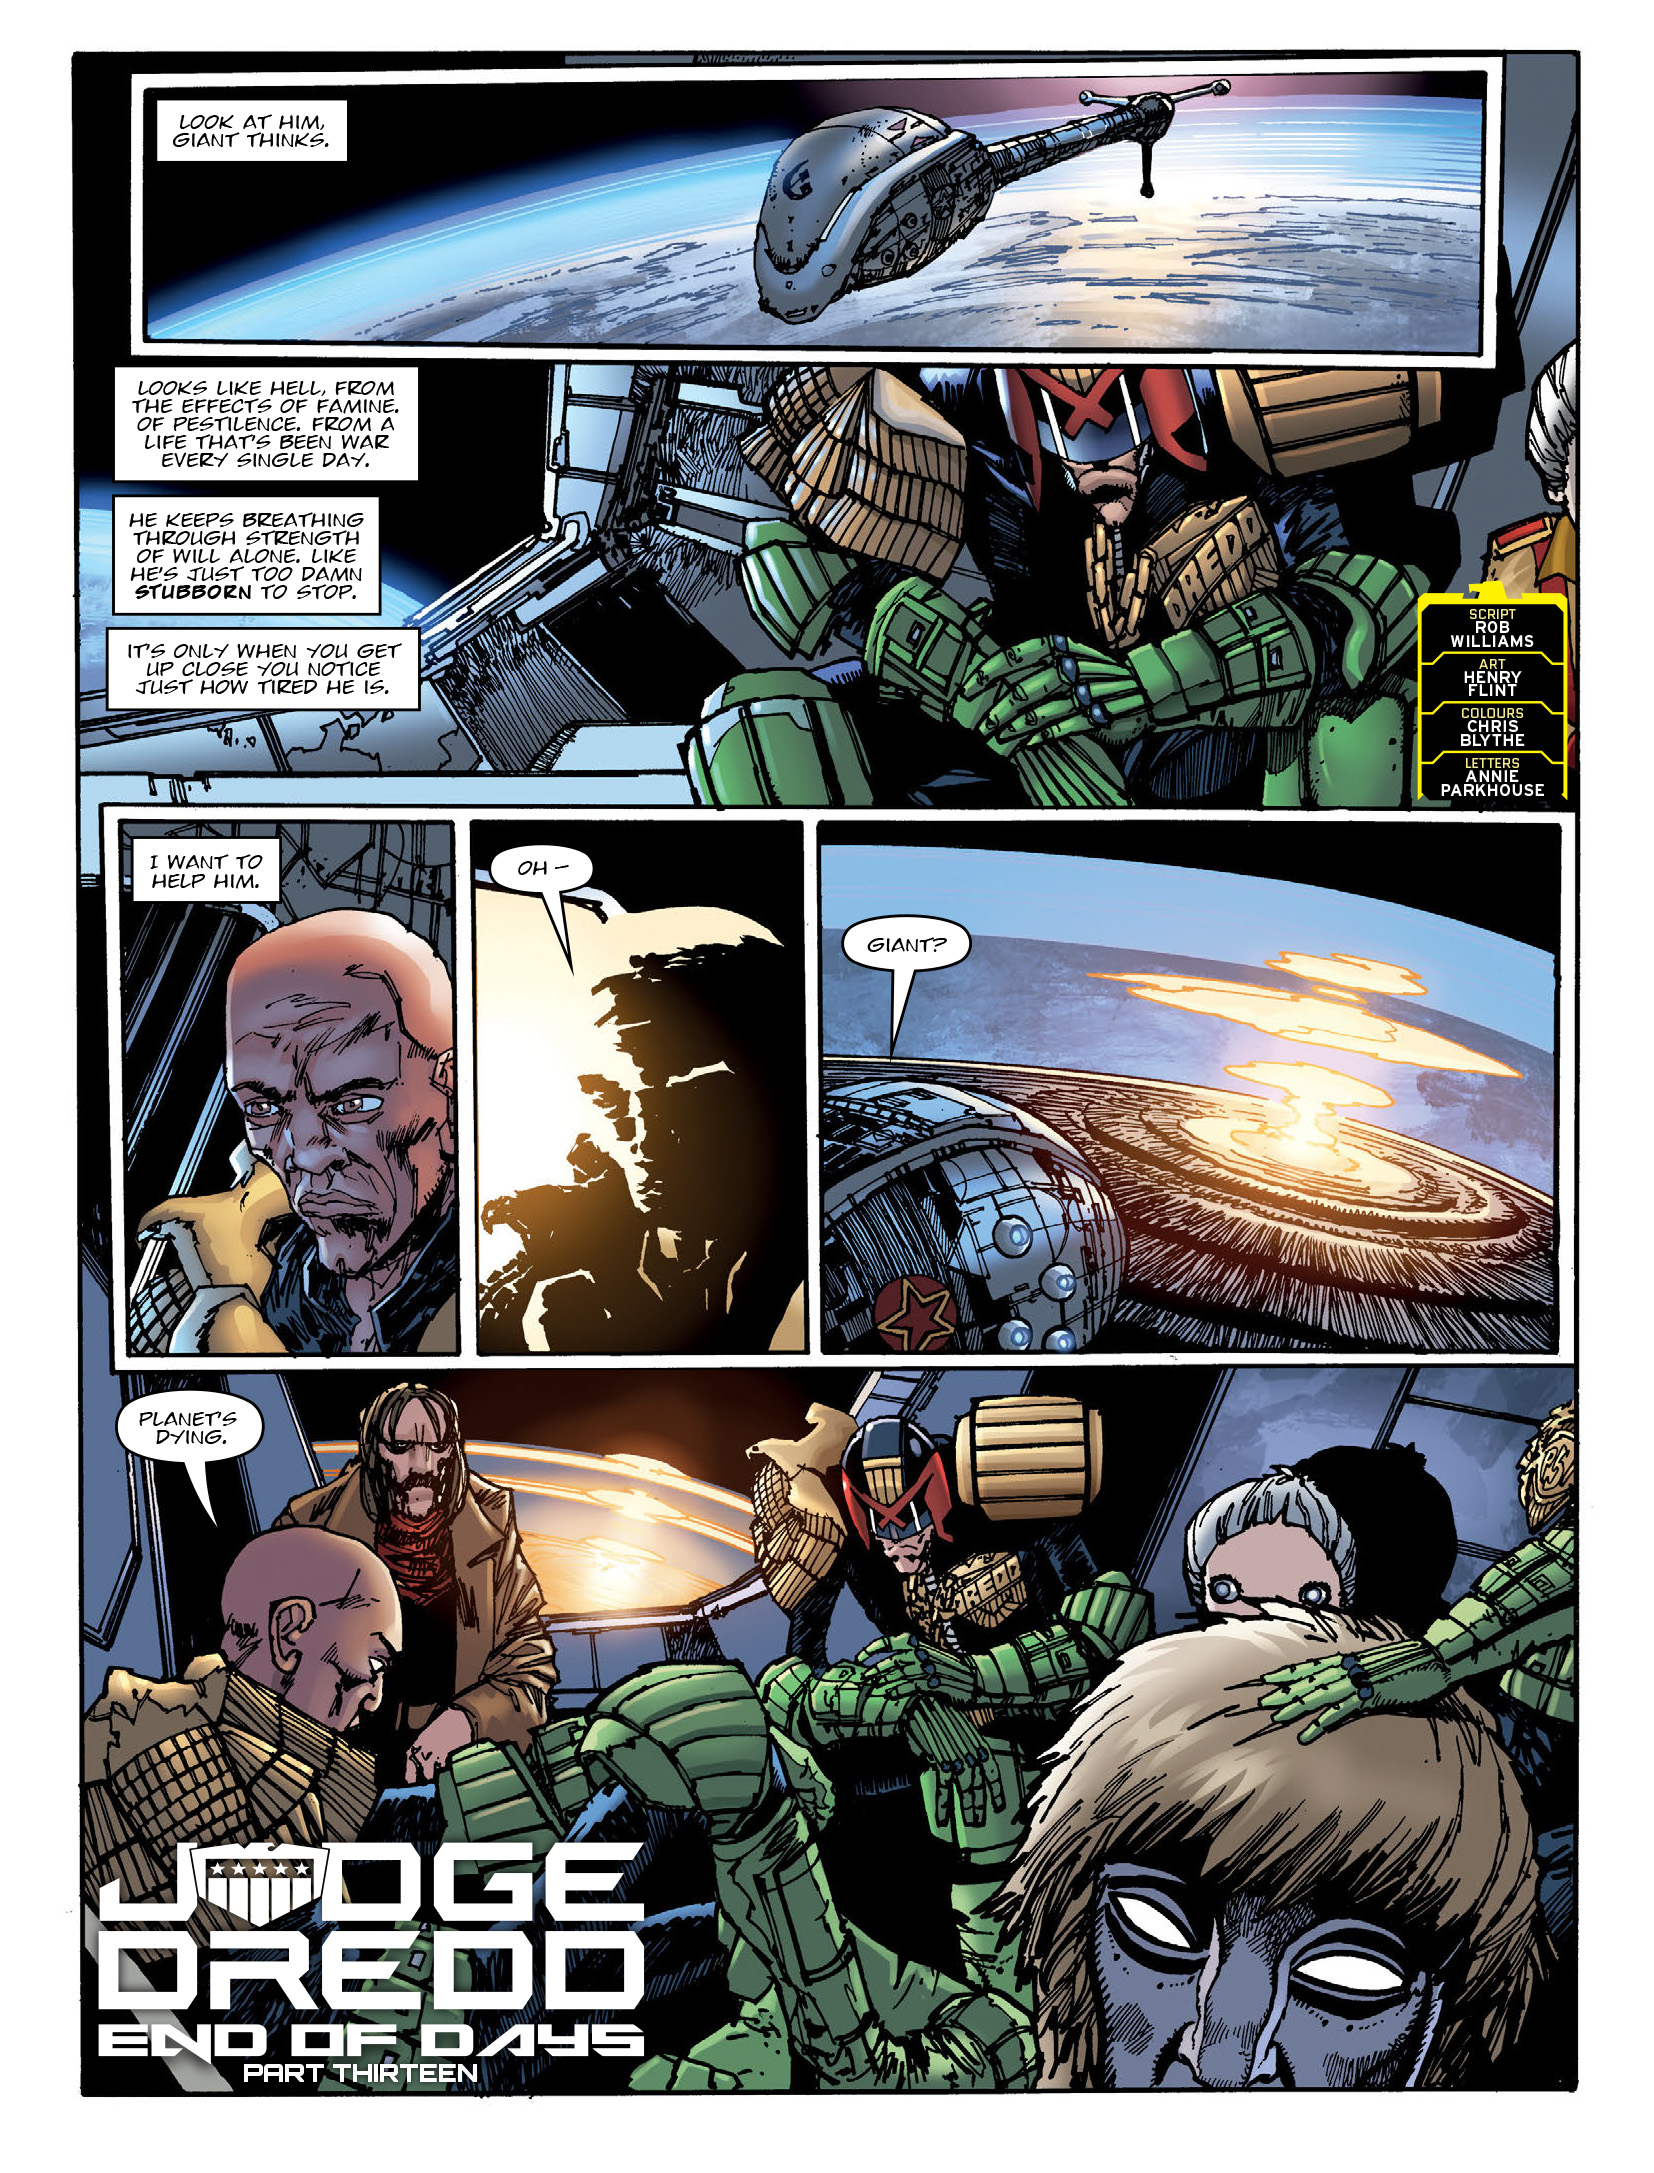 2000 AD: Chapter 2197 - Page 3